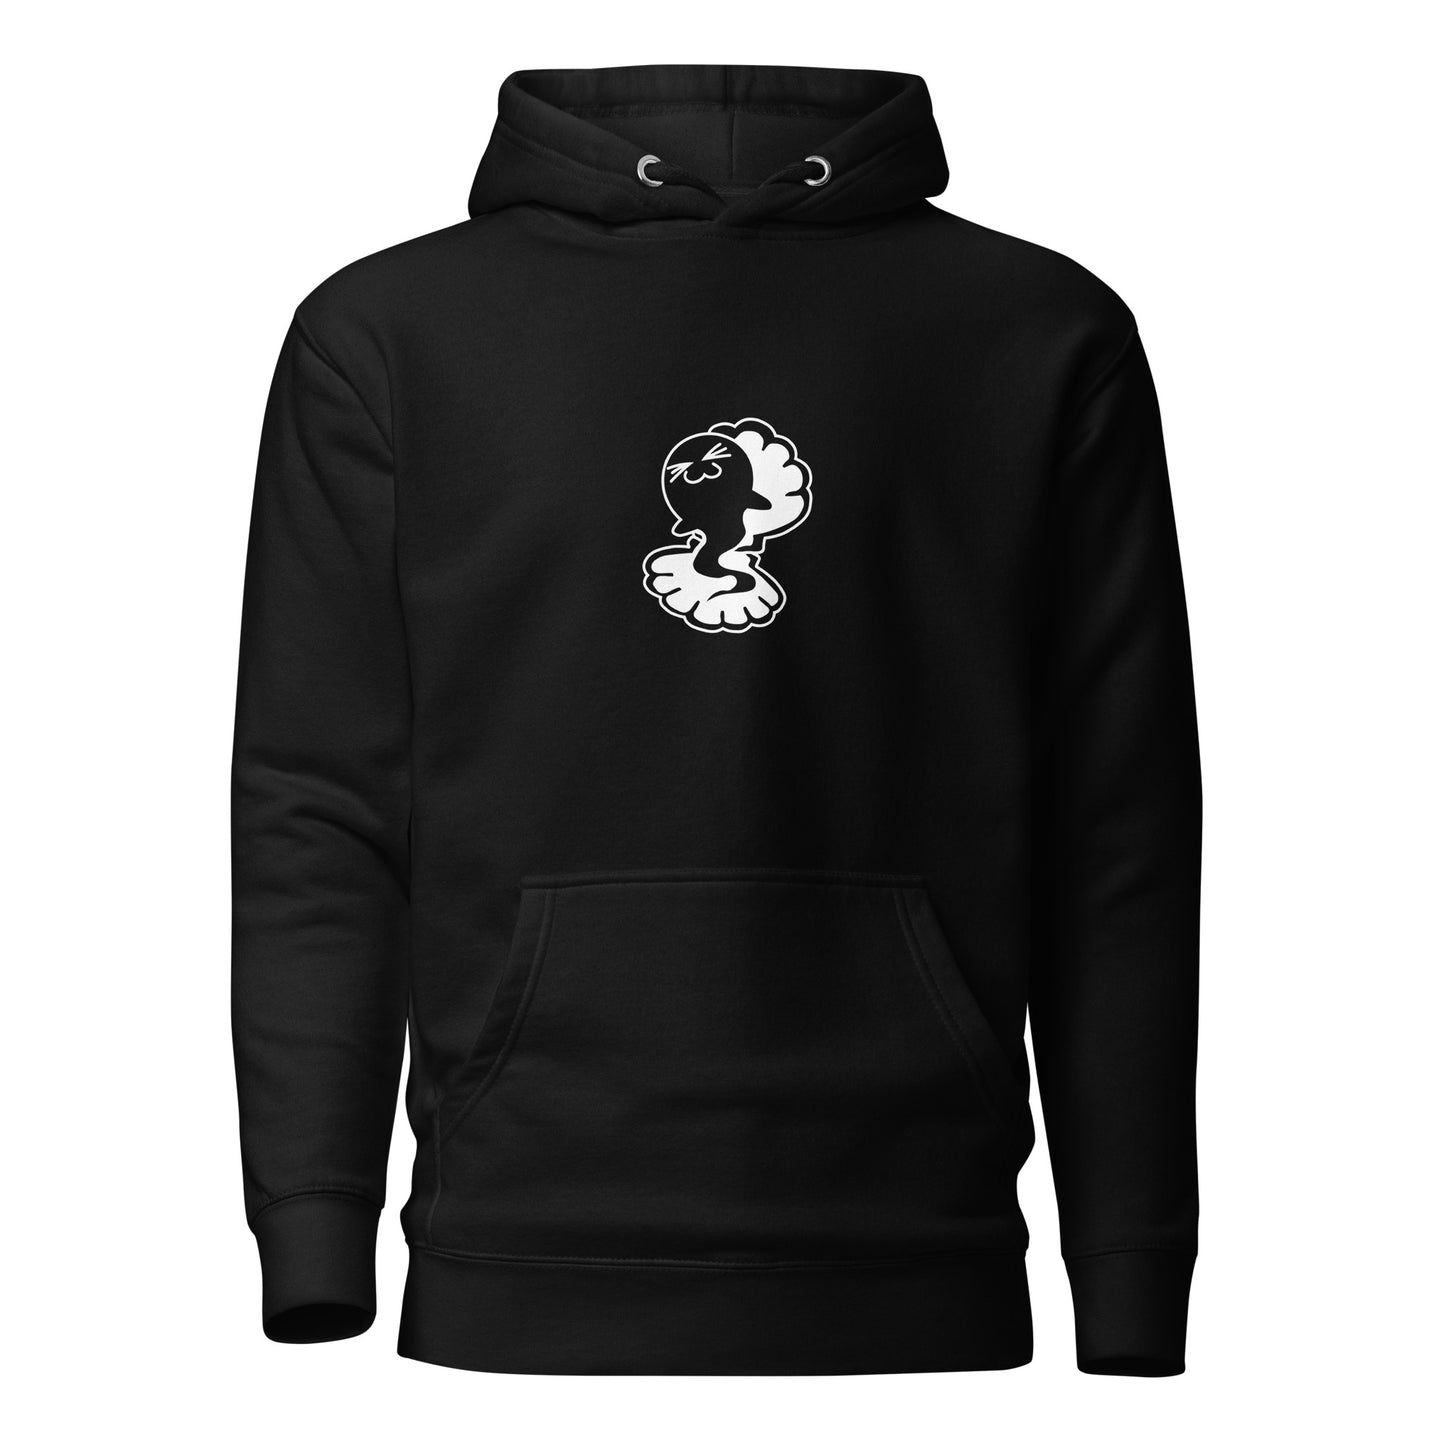 Judy's Ghost in the Shell Tattoo Sudadera con capucha (Unisex)